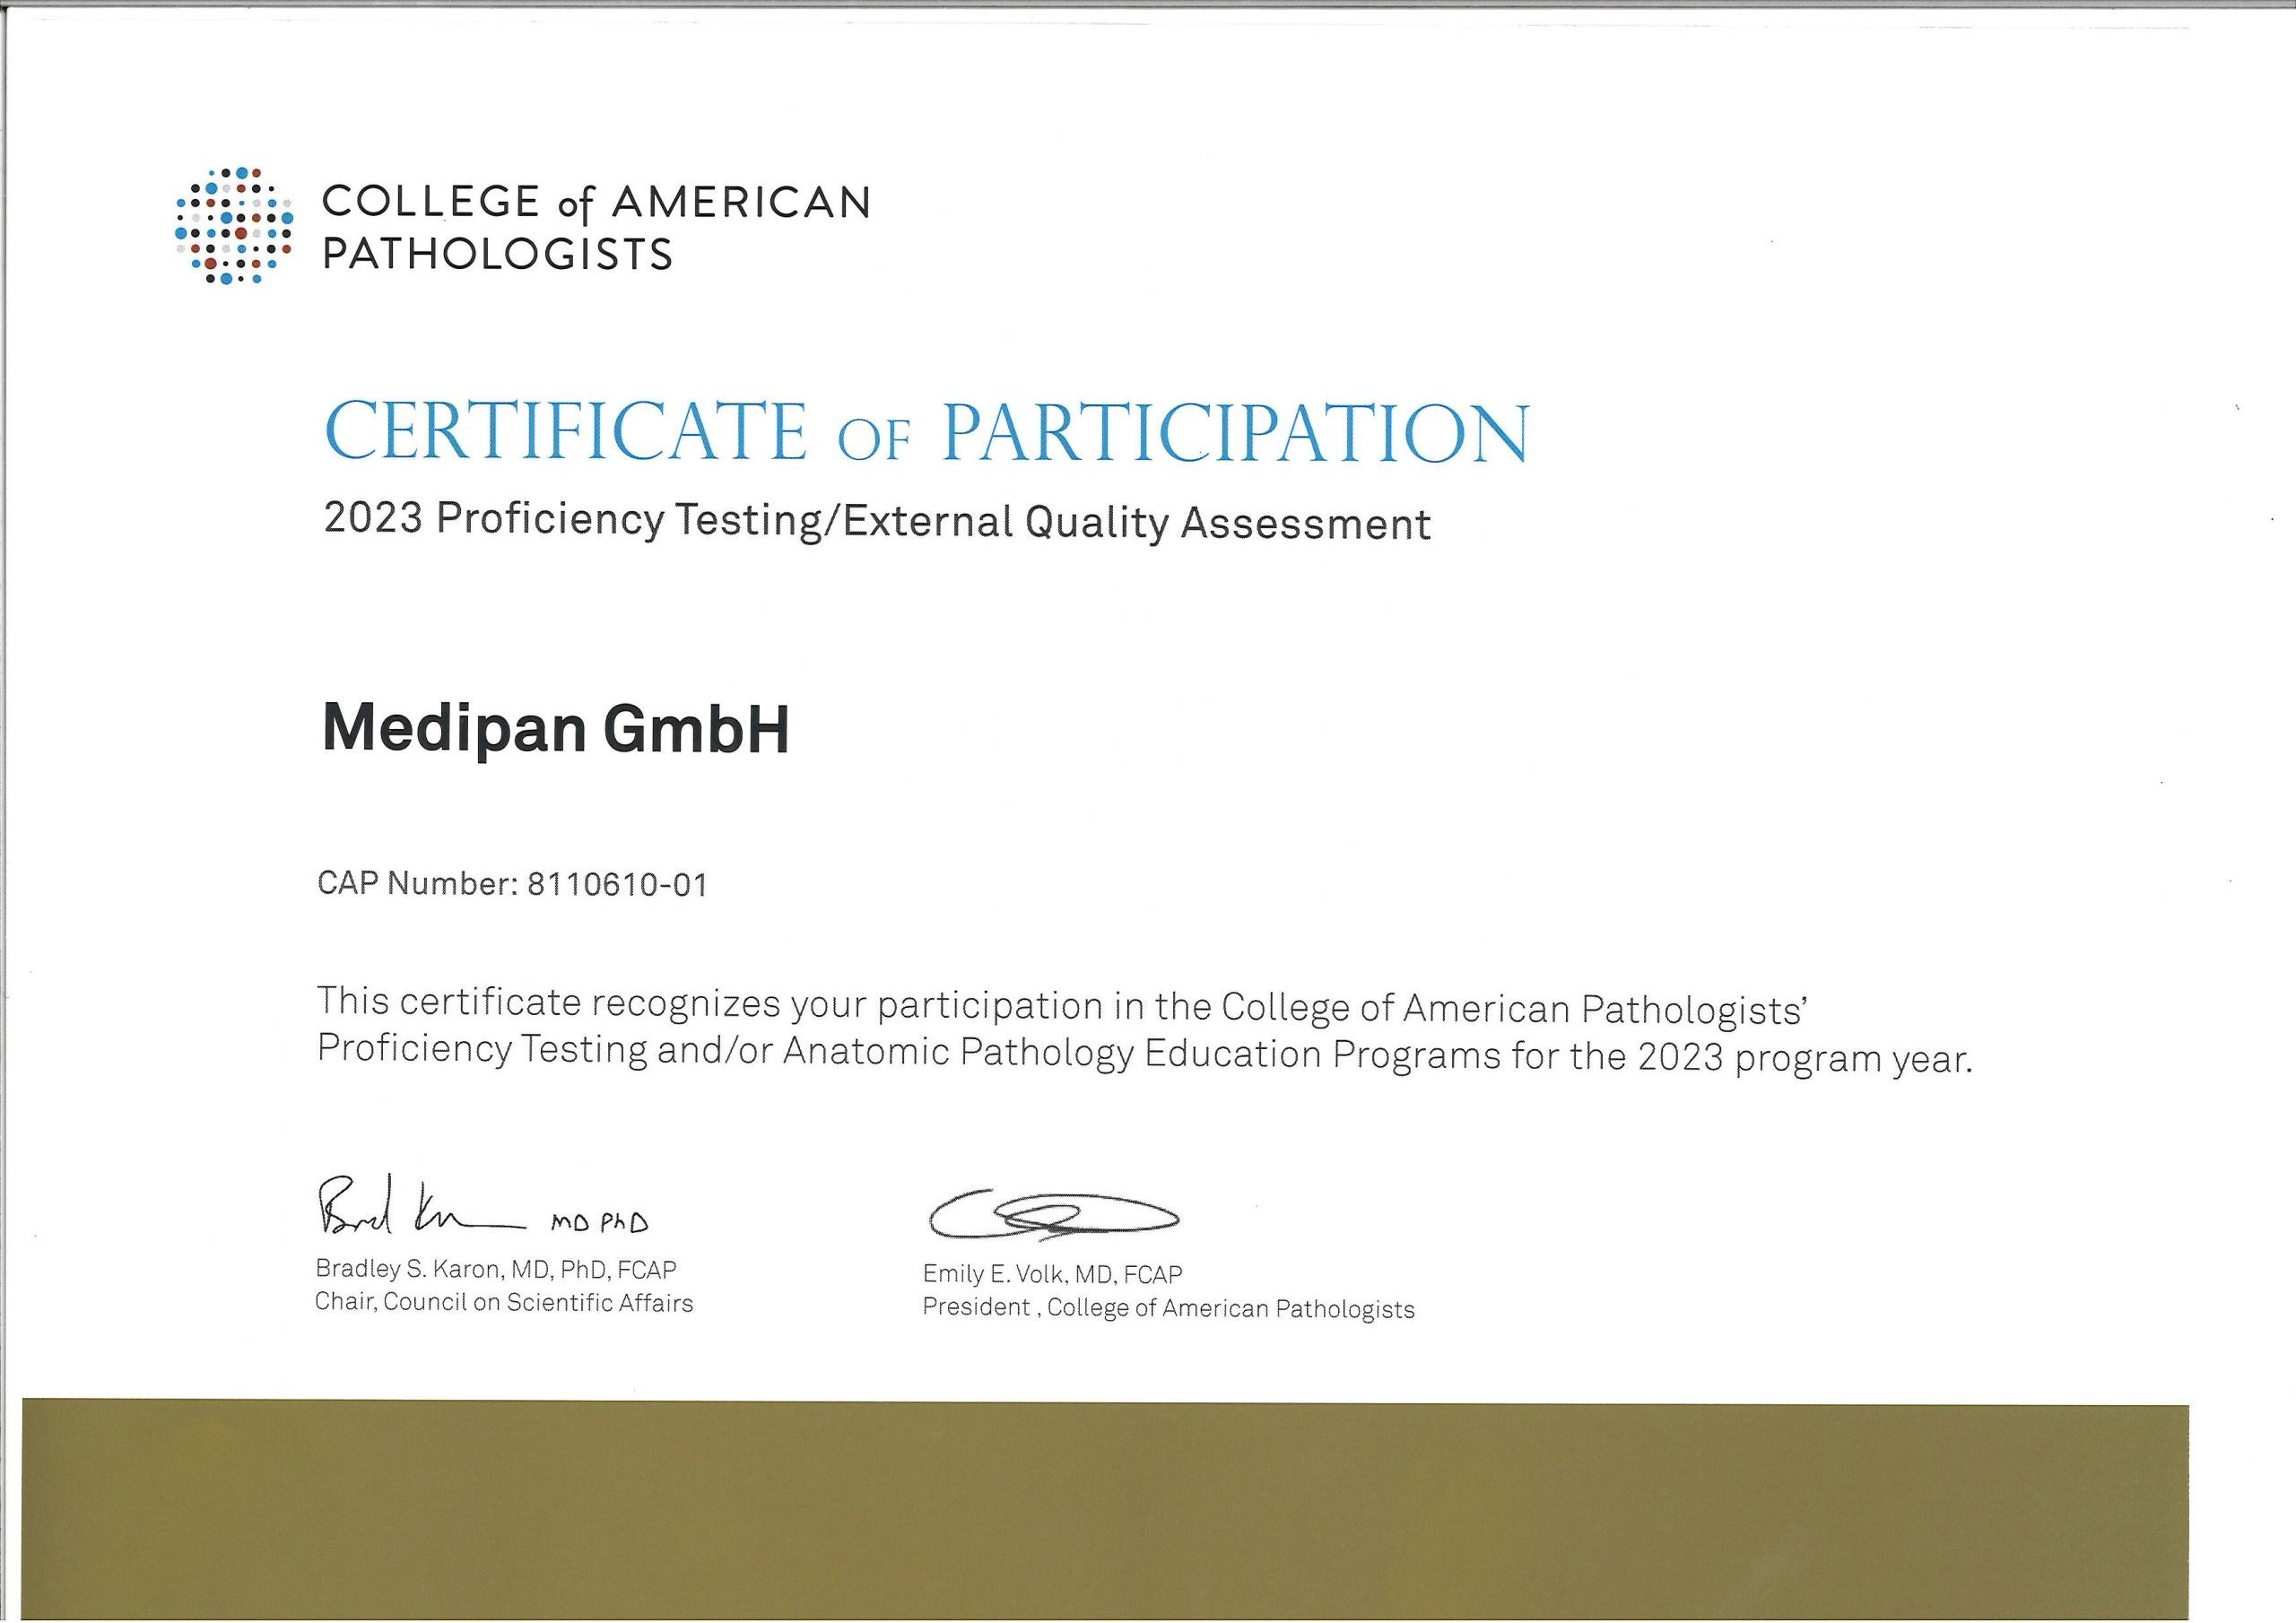 Certificate of partecipation 2023 to the proficiency testing/external qualty assessment Antinuclear Antibody (ANA) Survey, organized by the College of American Pathologists (CAP).